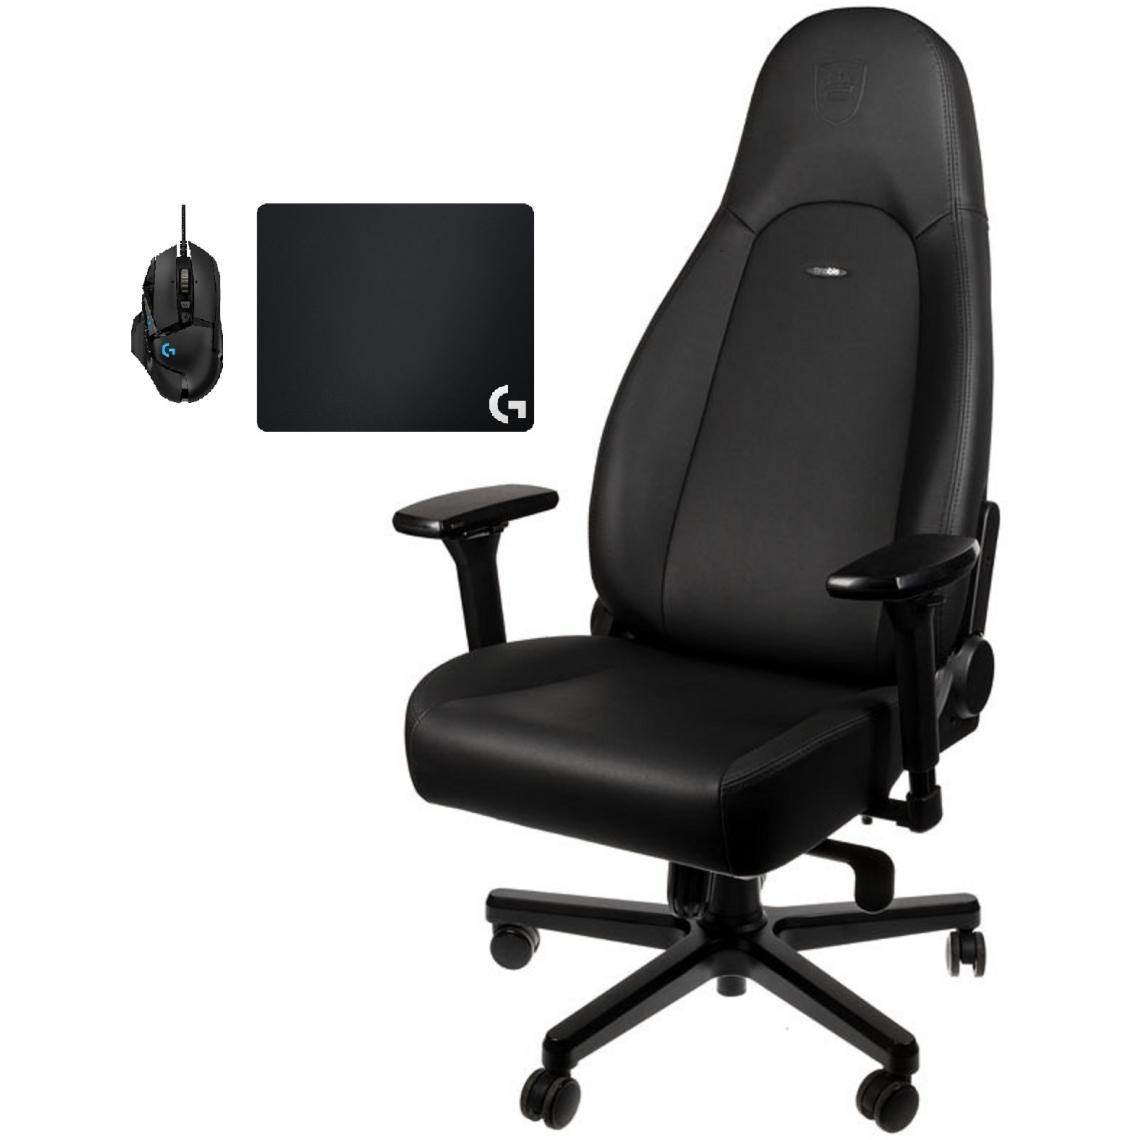 Noblechairs - Chaise Gamer ICON - Black Edition + Souris G502 HERO + Tapis de souris G240 - Chaise gamer